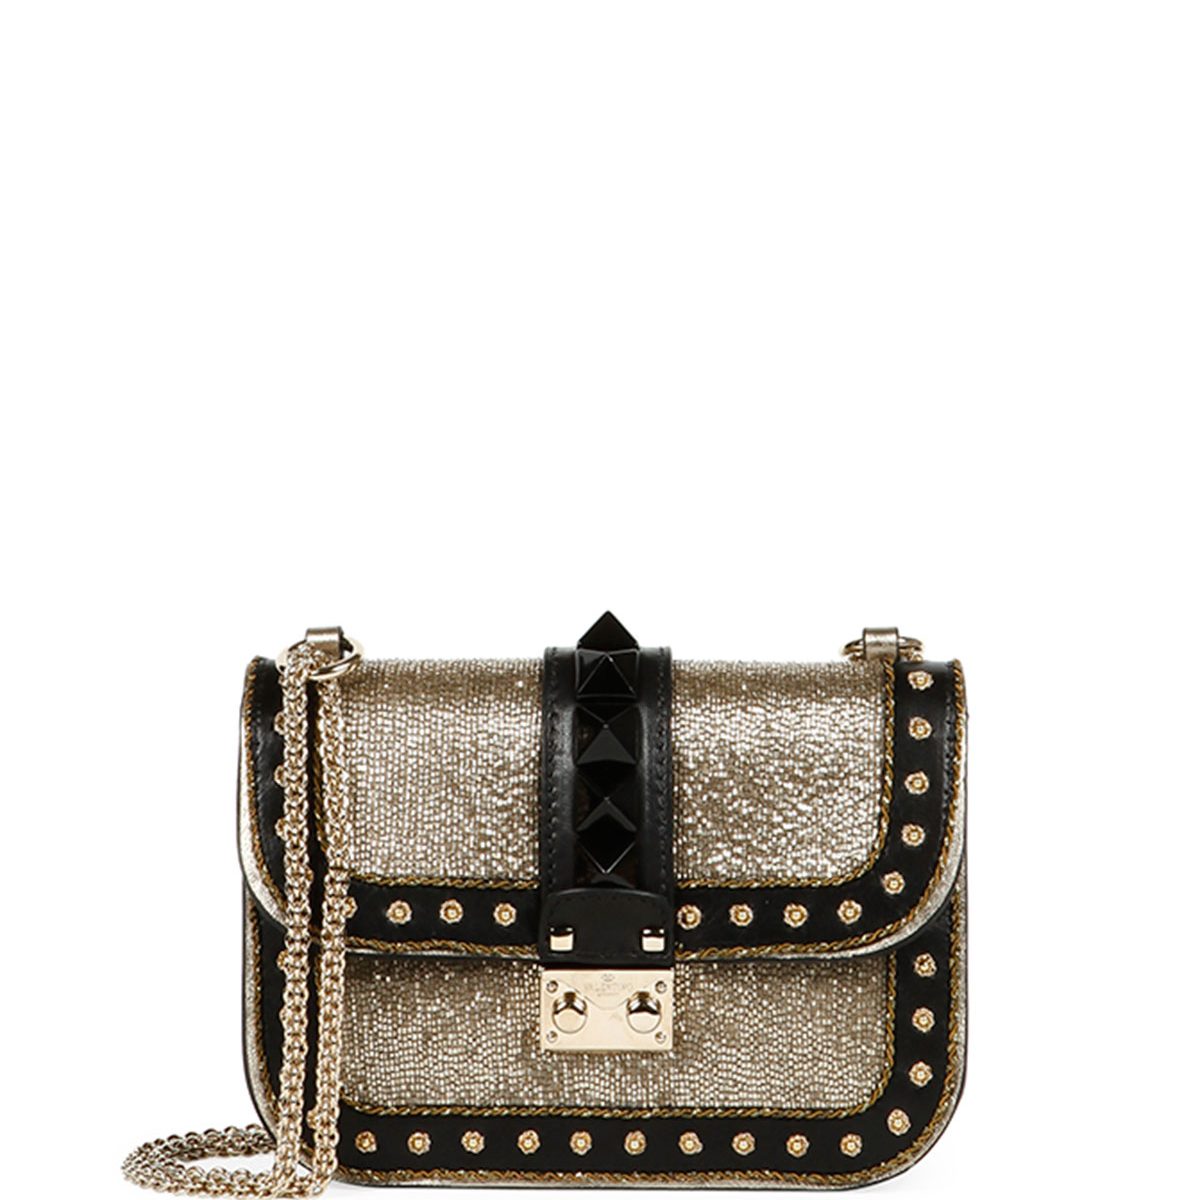 Valentino Fall/Winter 2015 Bag Collection Featuring Camonoir Pathchwork ...